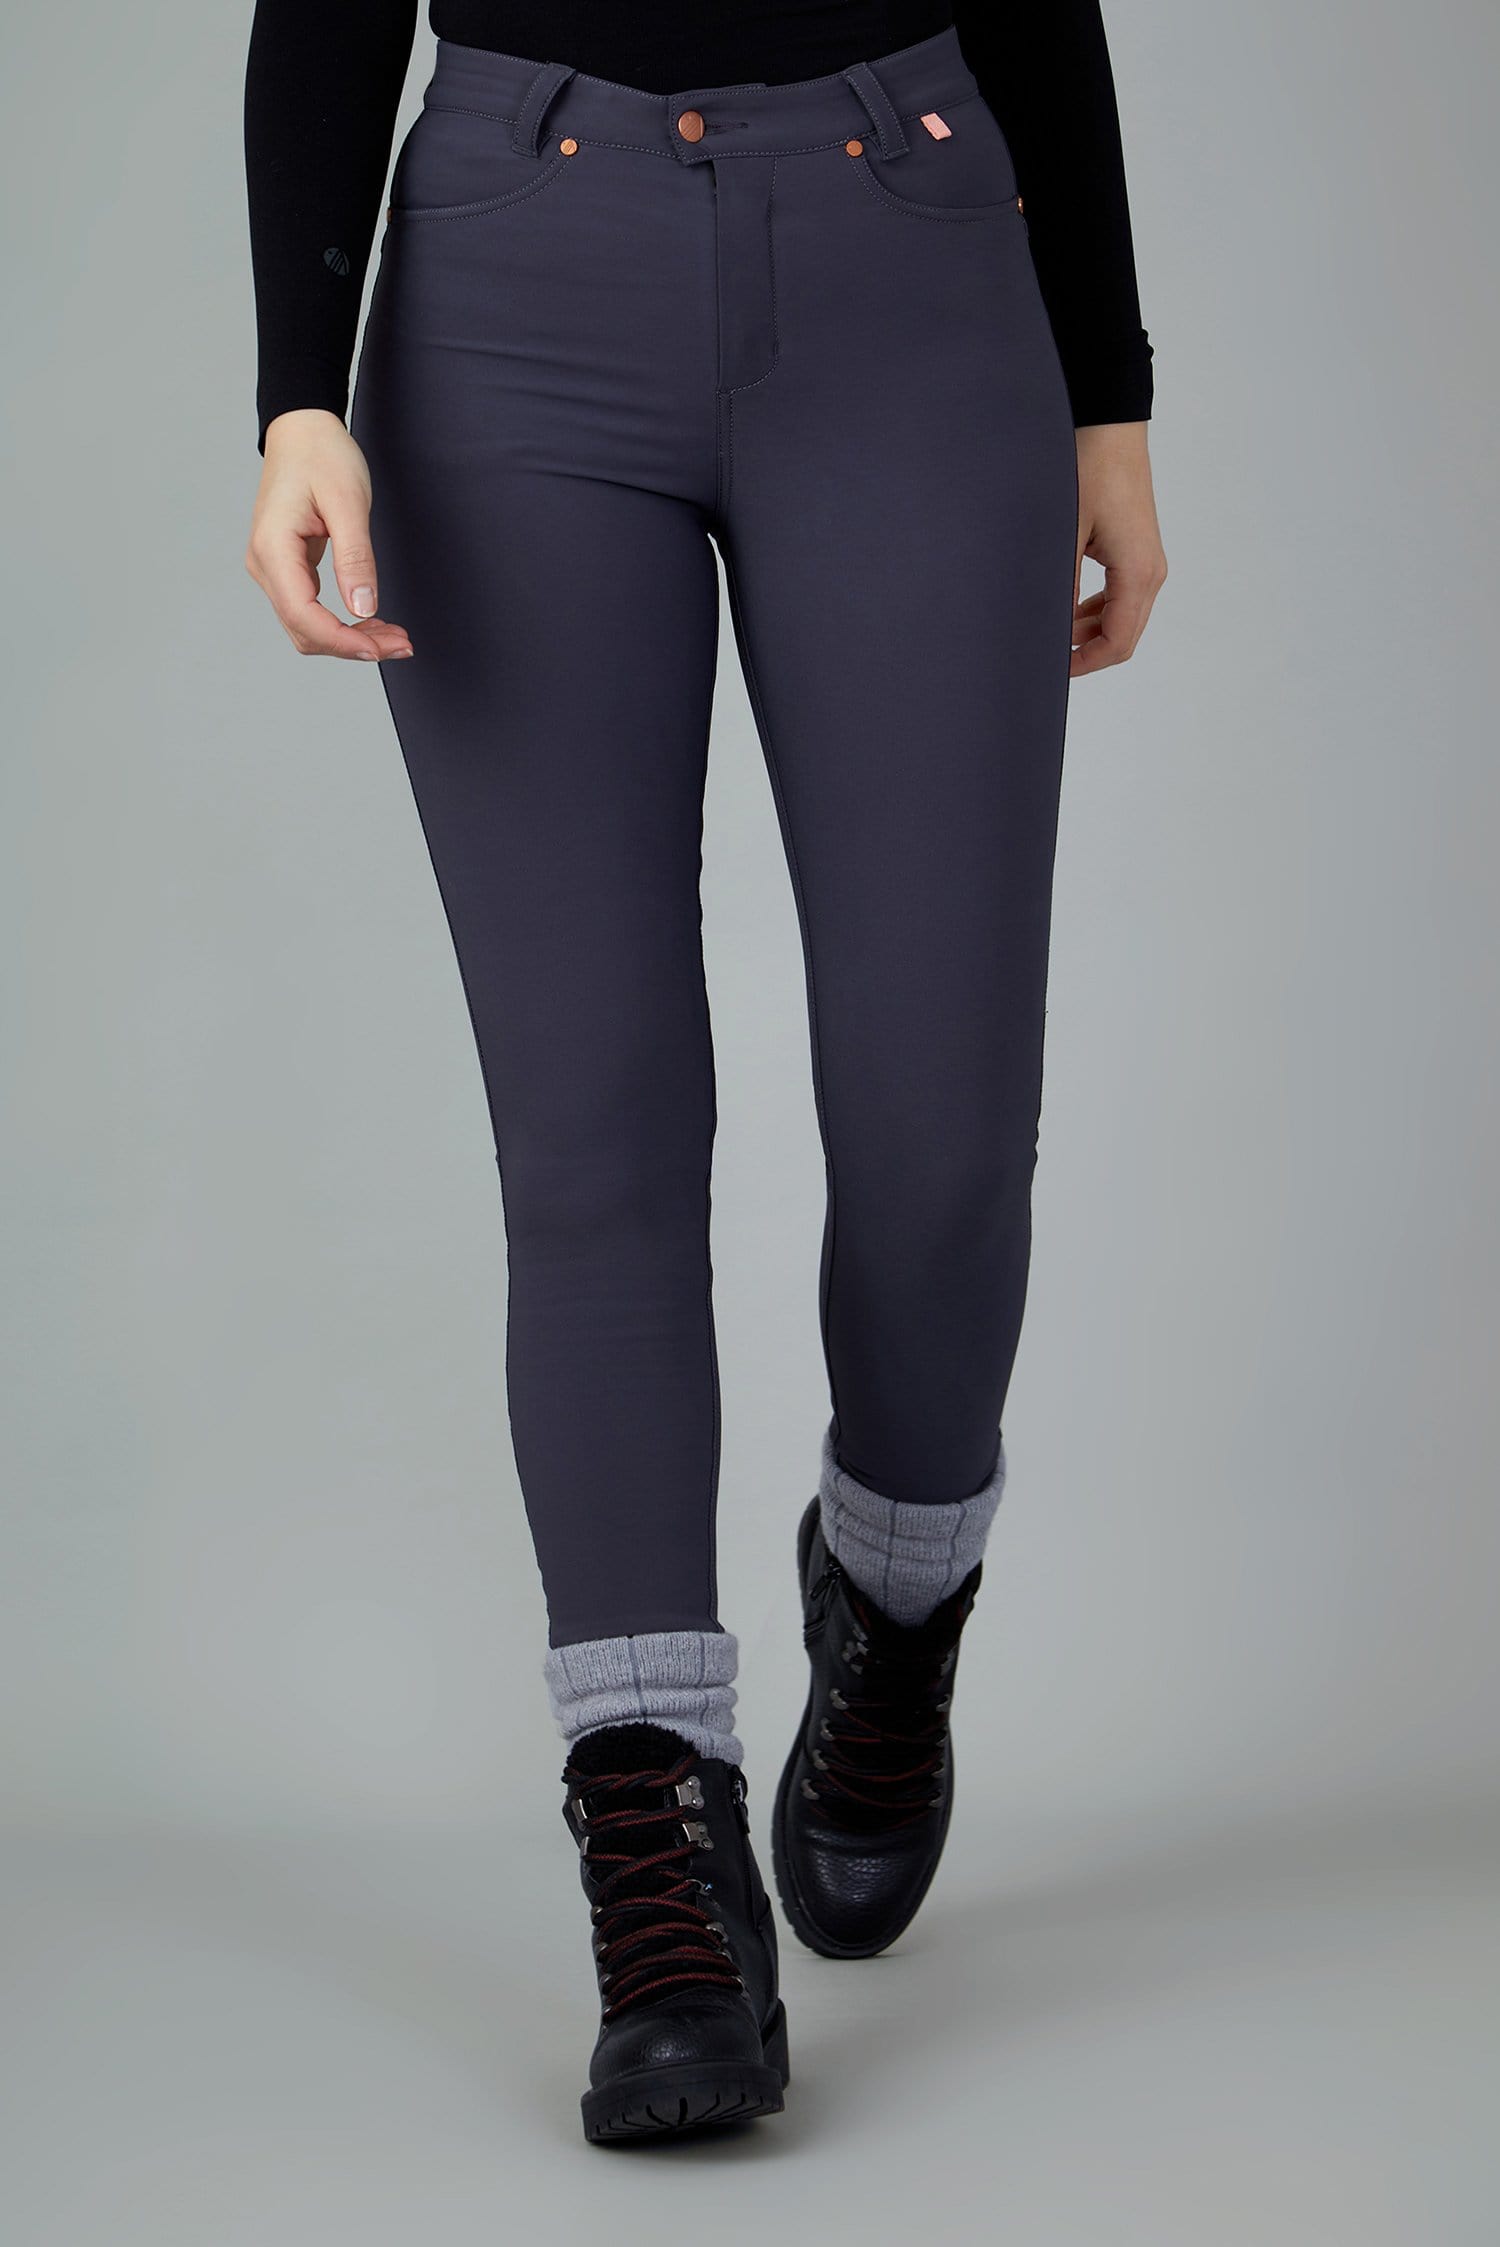 The Aventurite Stretch Skinny Outdoor Trousers - Obsidian - 30p / Uk12 - Womens - Acai Outdoorwear